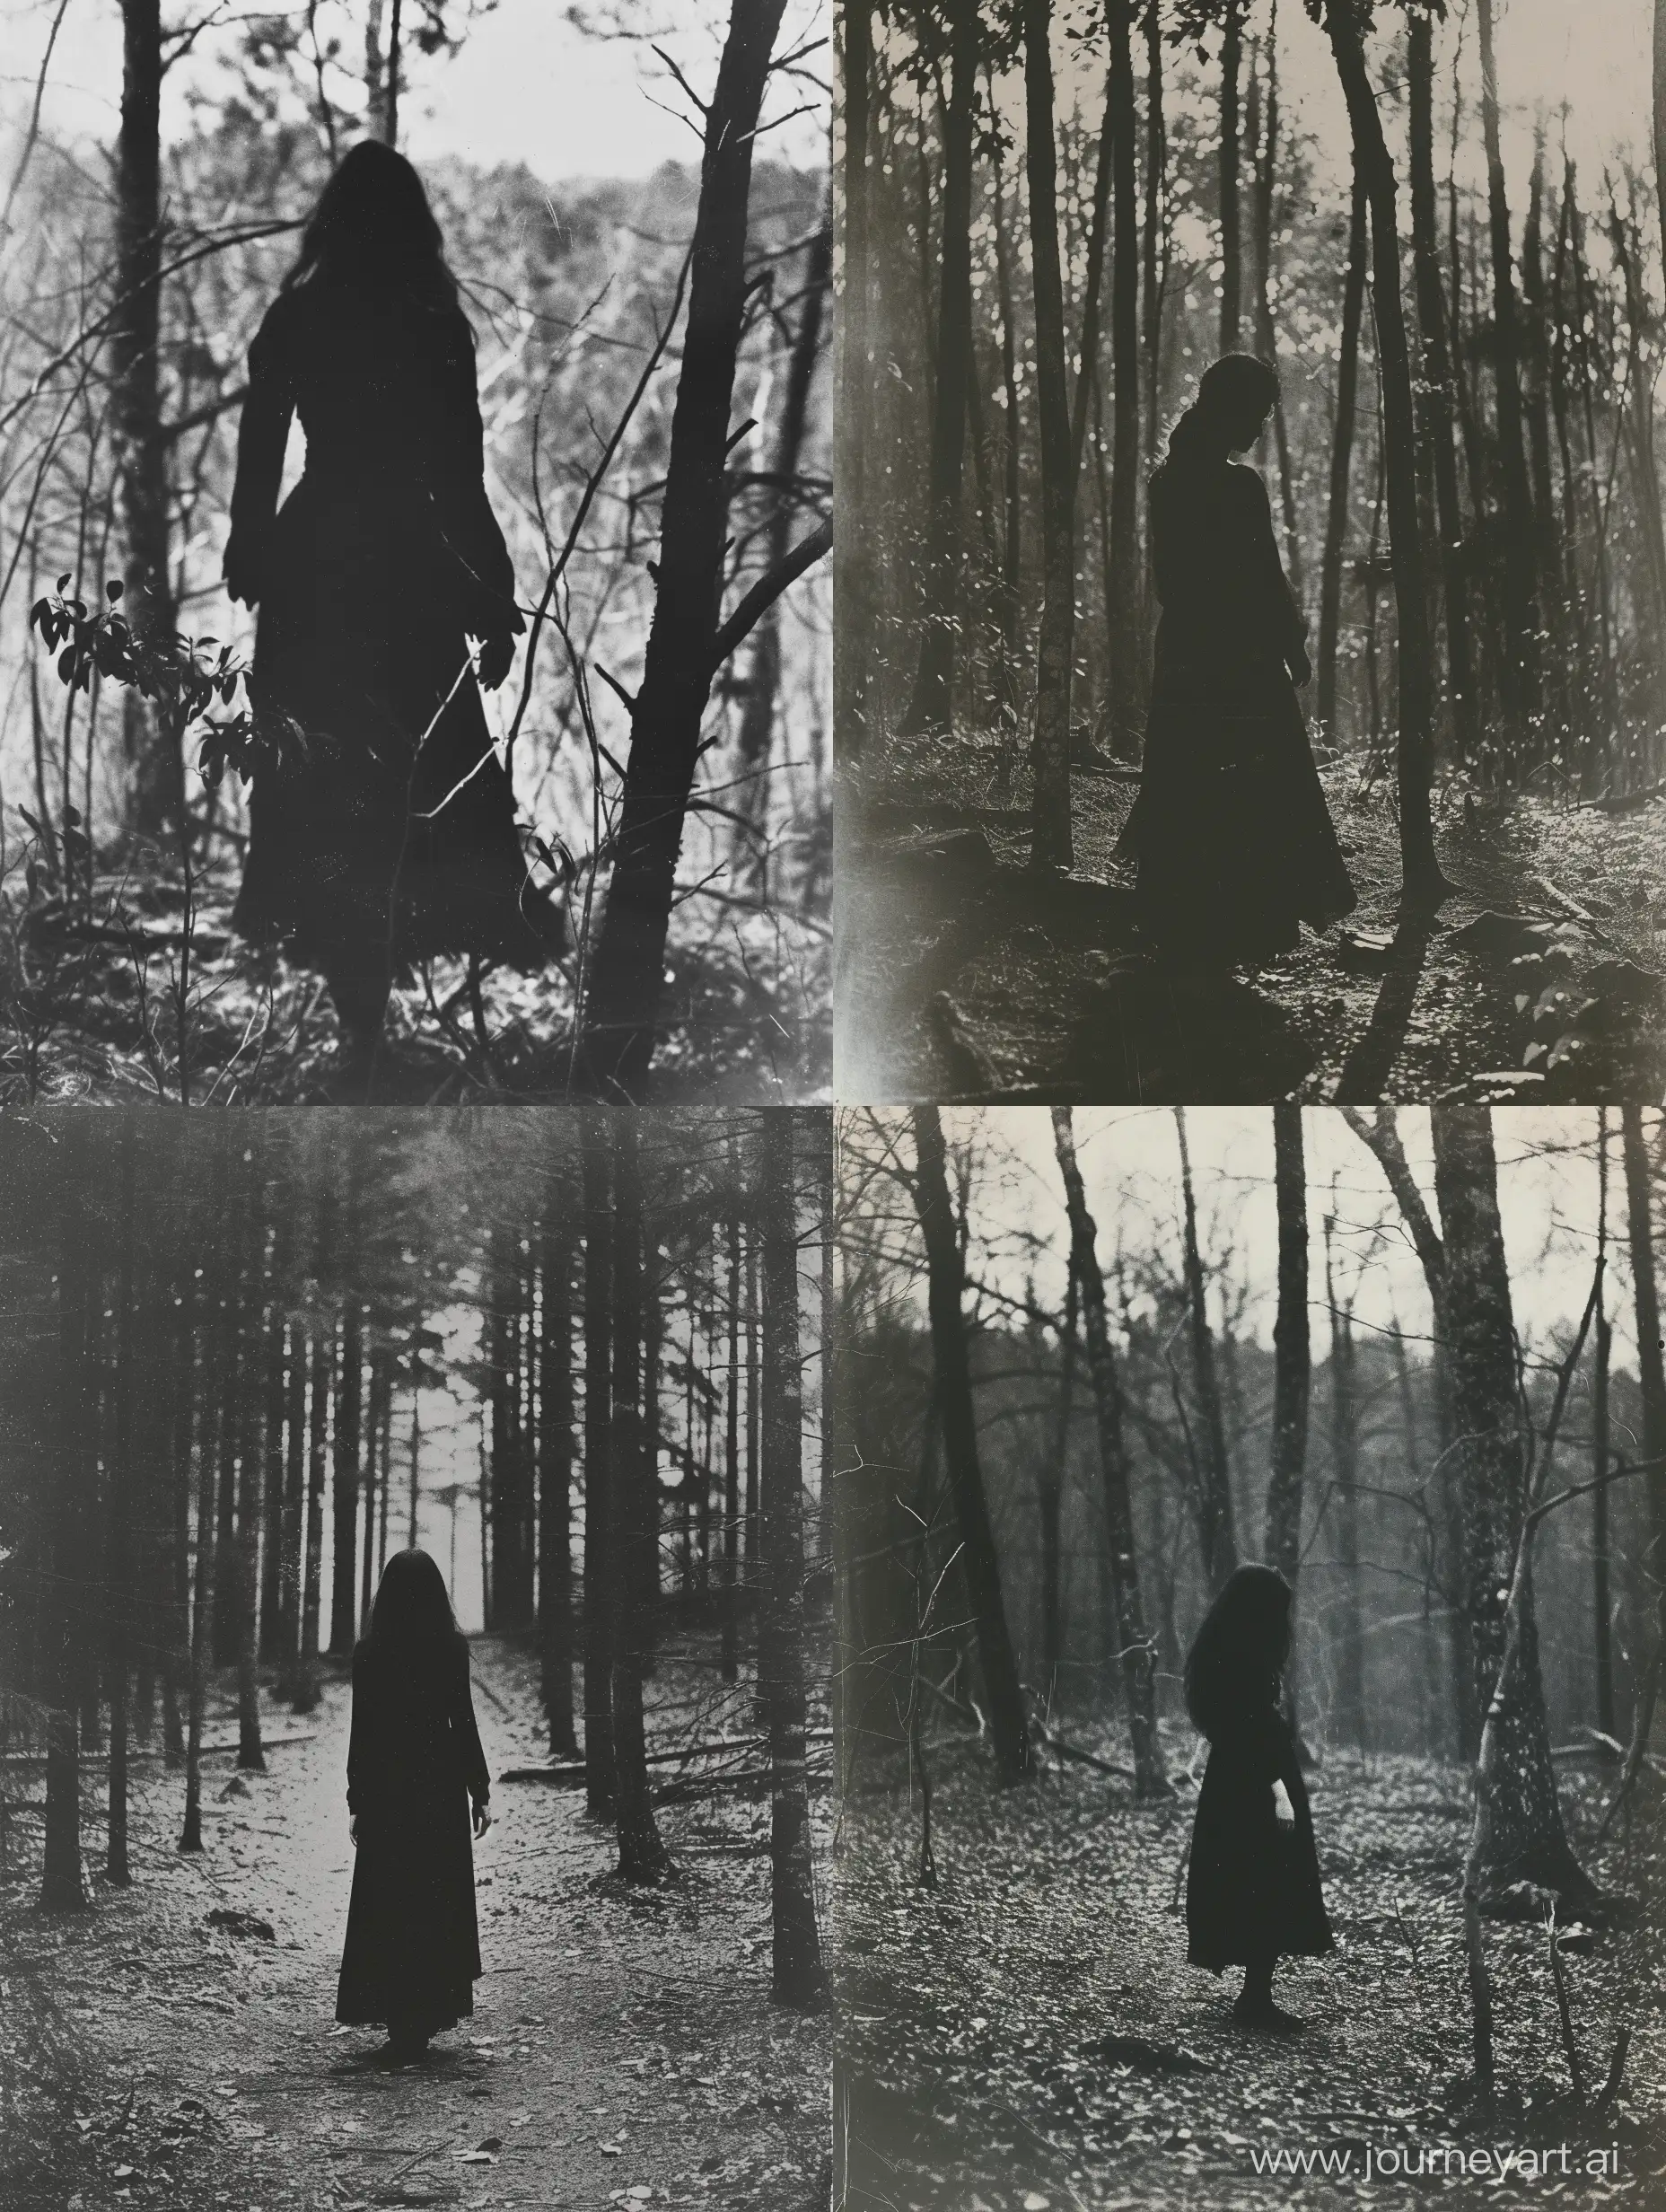 Mysterious-Demonic-Woman-in-Minimalistic-Grayscale-Forest